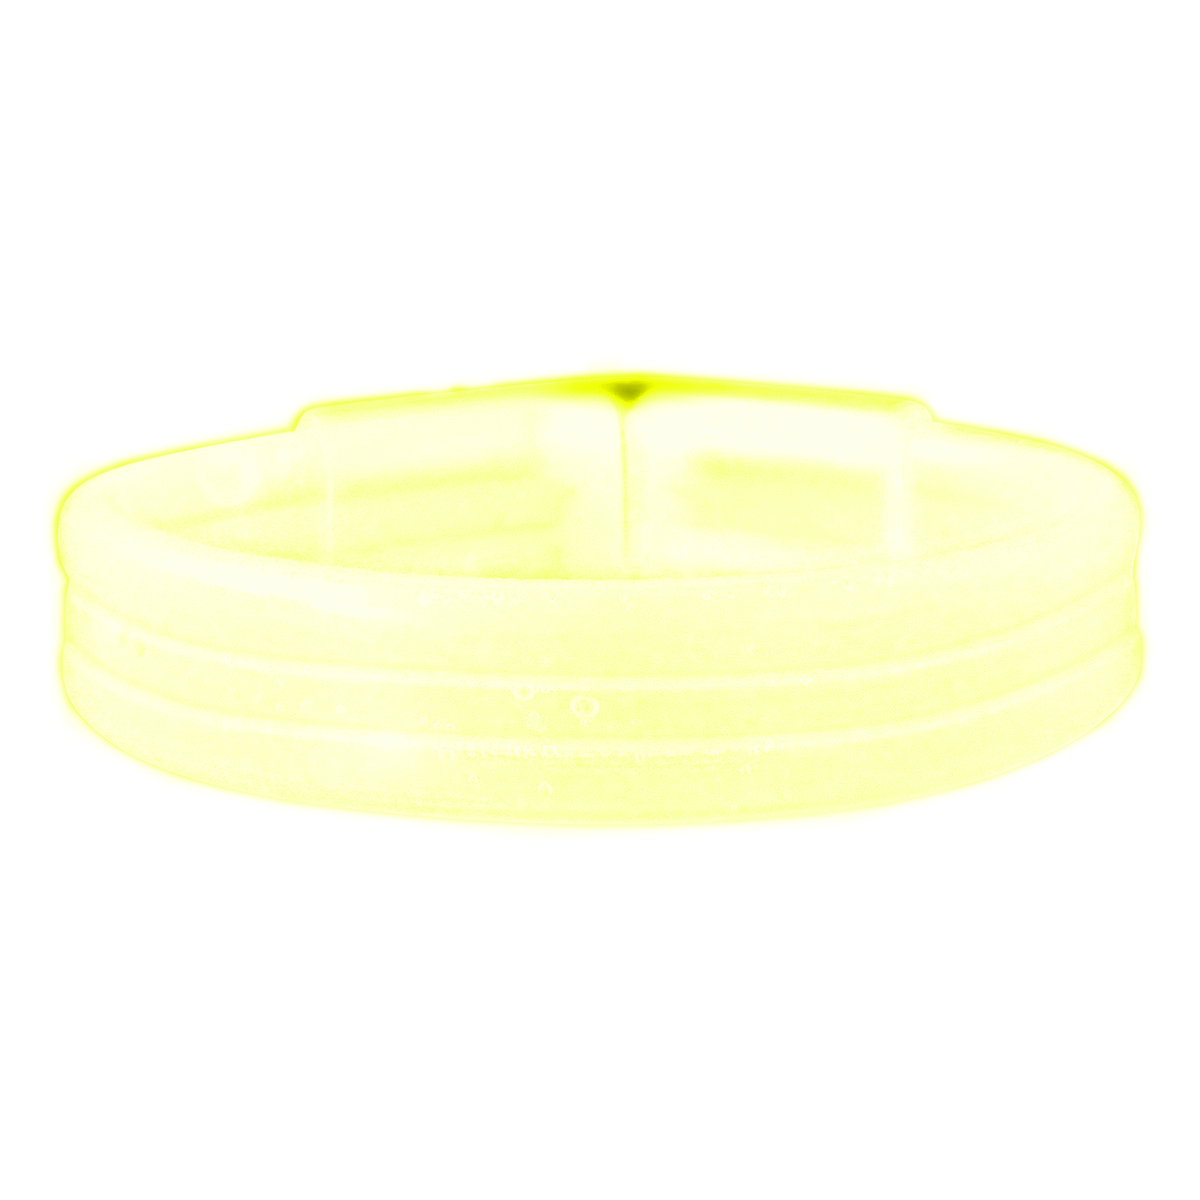 Wide Glow Stick 8 Inch Bracelet Yellow Pack of 25 All Products